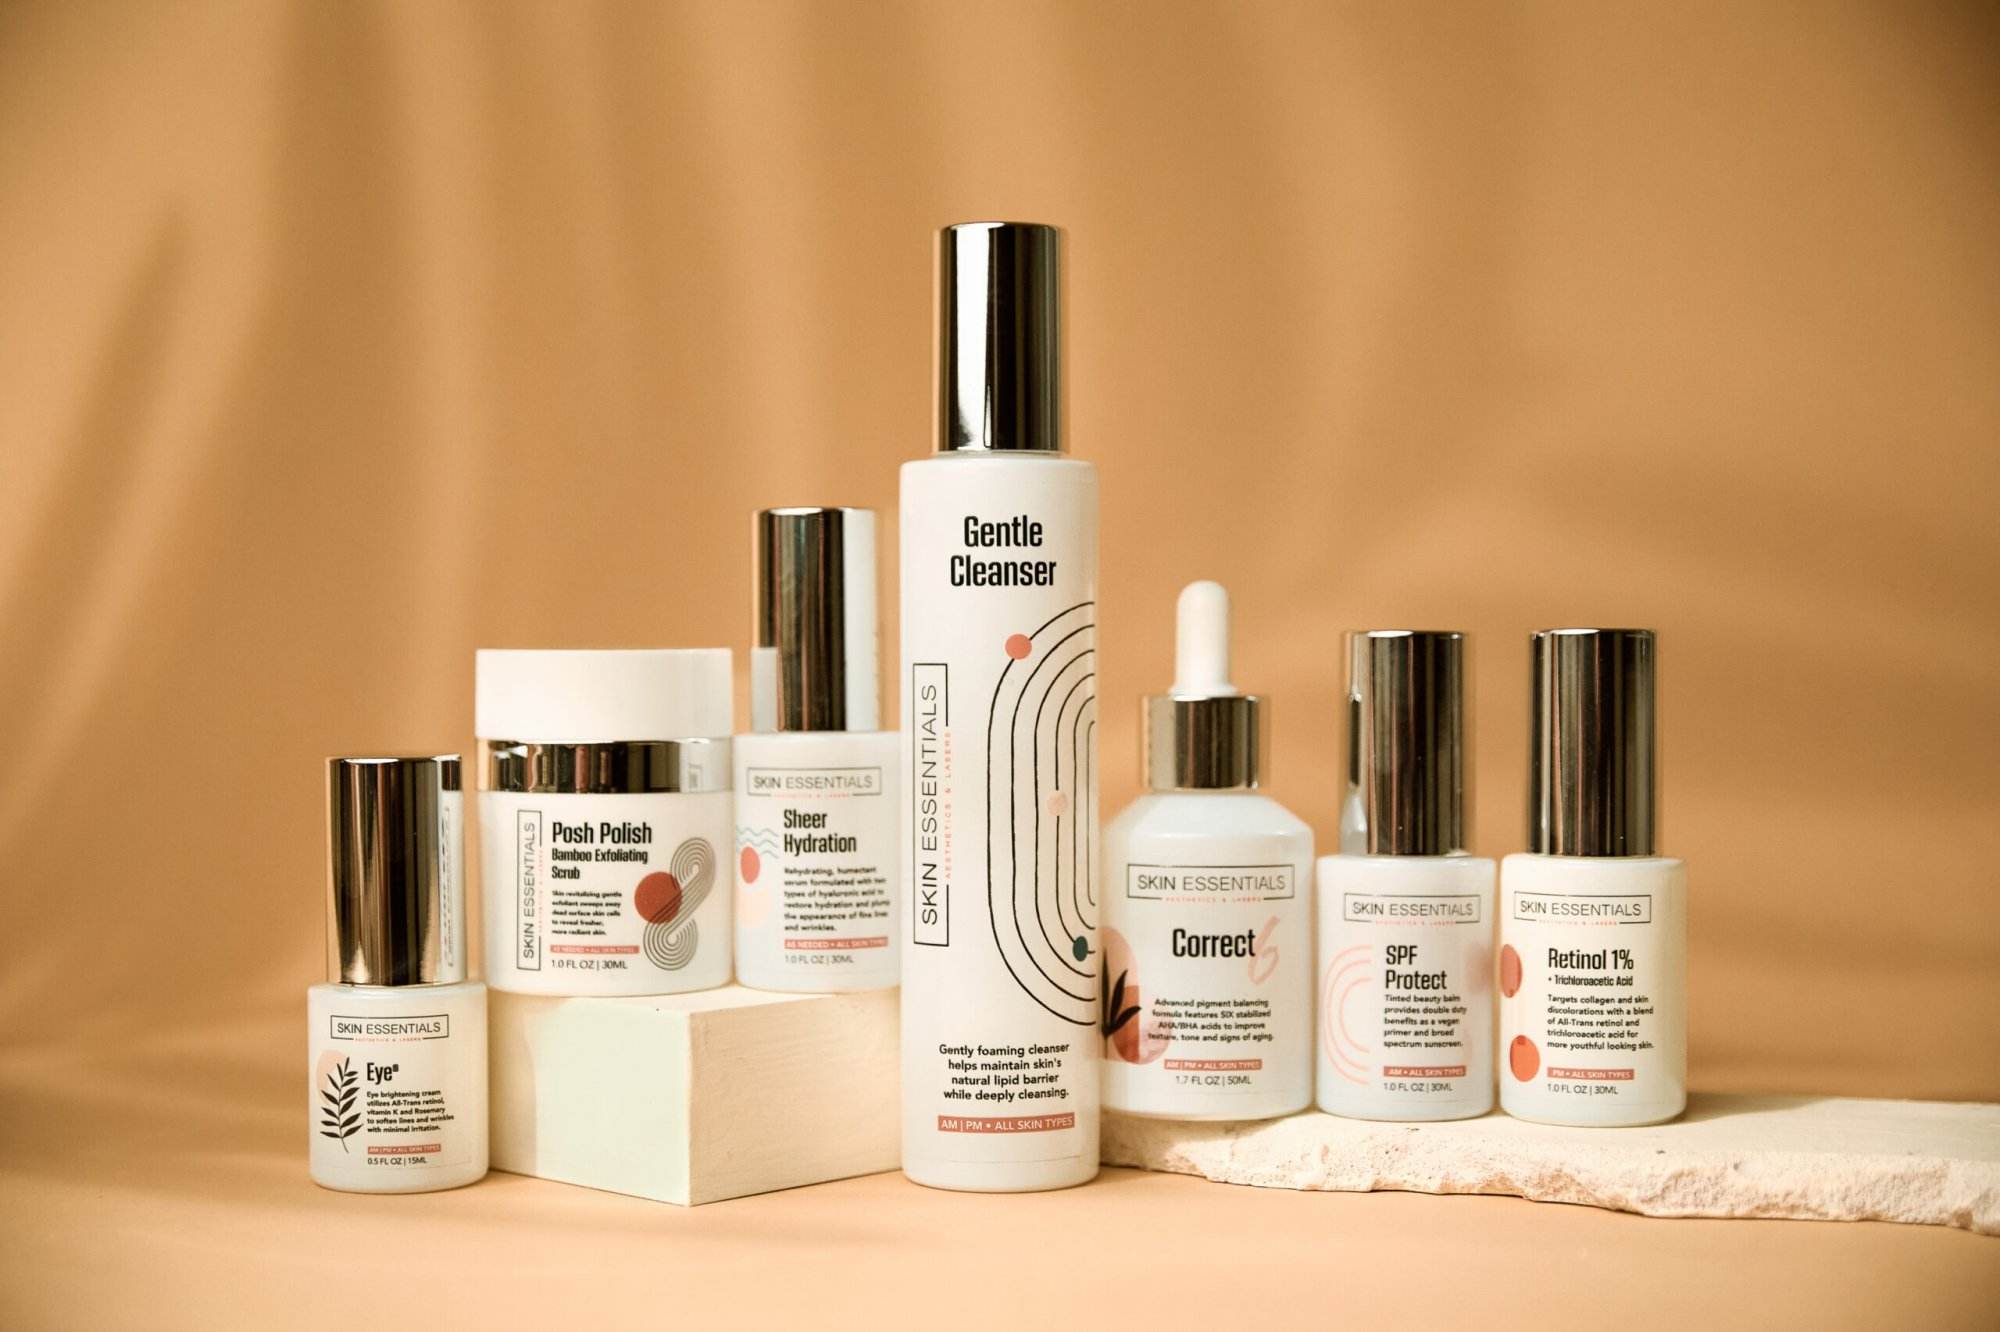 A collection of Bamboo Exfoliating Polish on a beige background.